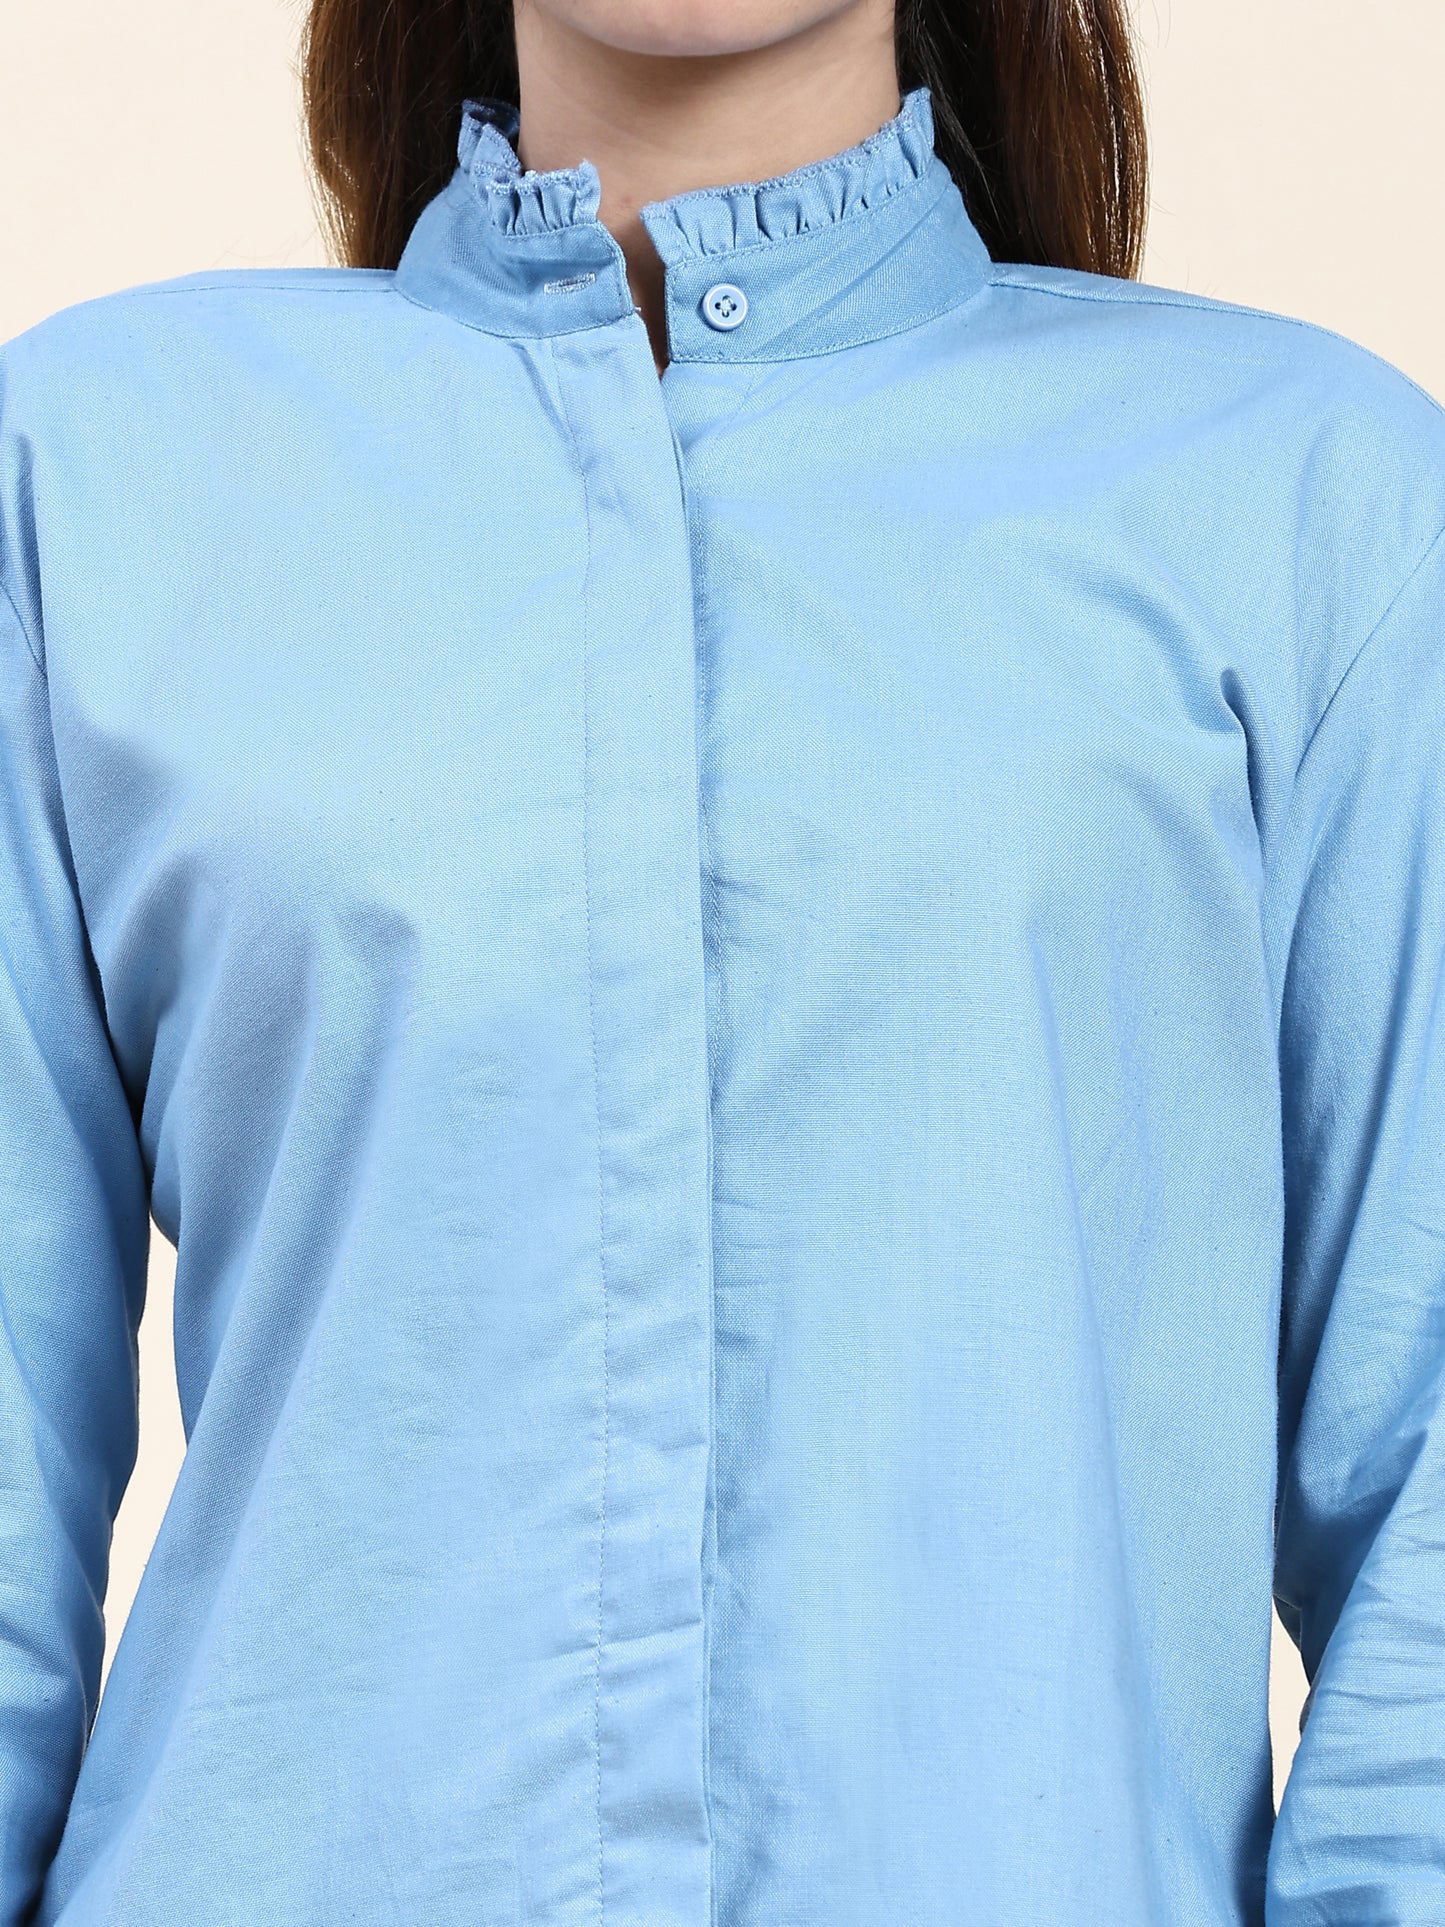 ANUSHIL Women's Cotton Shirts : Comfortable and Fashionable with Gathered Neck and Sleeves, Blue